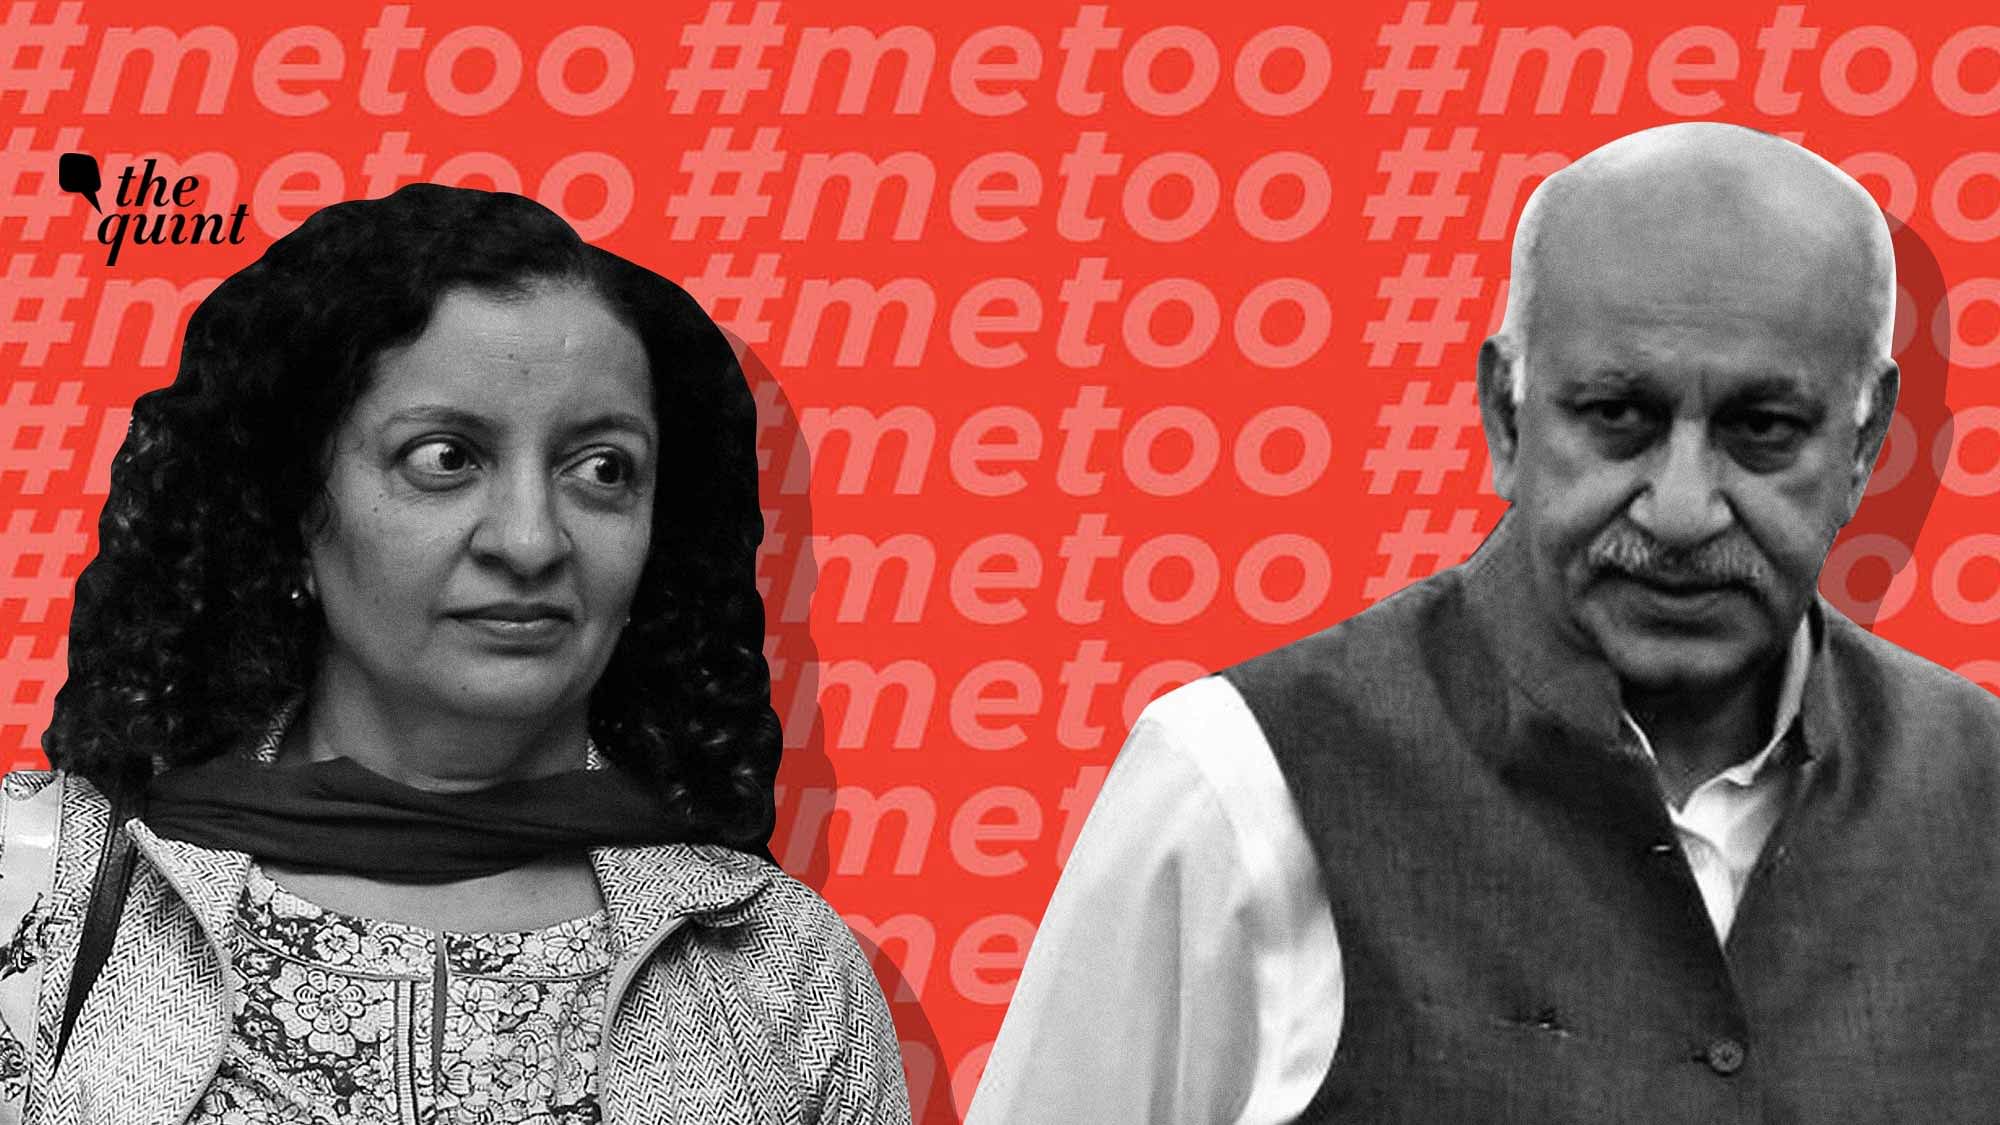 Priya Ramani’s lawyer Rebecca John will continue her concluding arguments on Tuesday, 8 September, in a defamation case against Ramani, brought on by former BJP minister MJ Akbar.